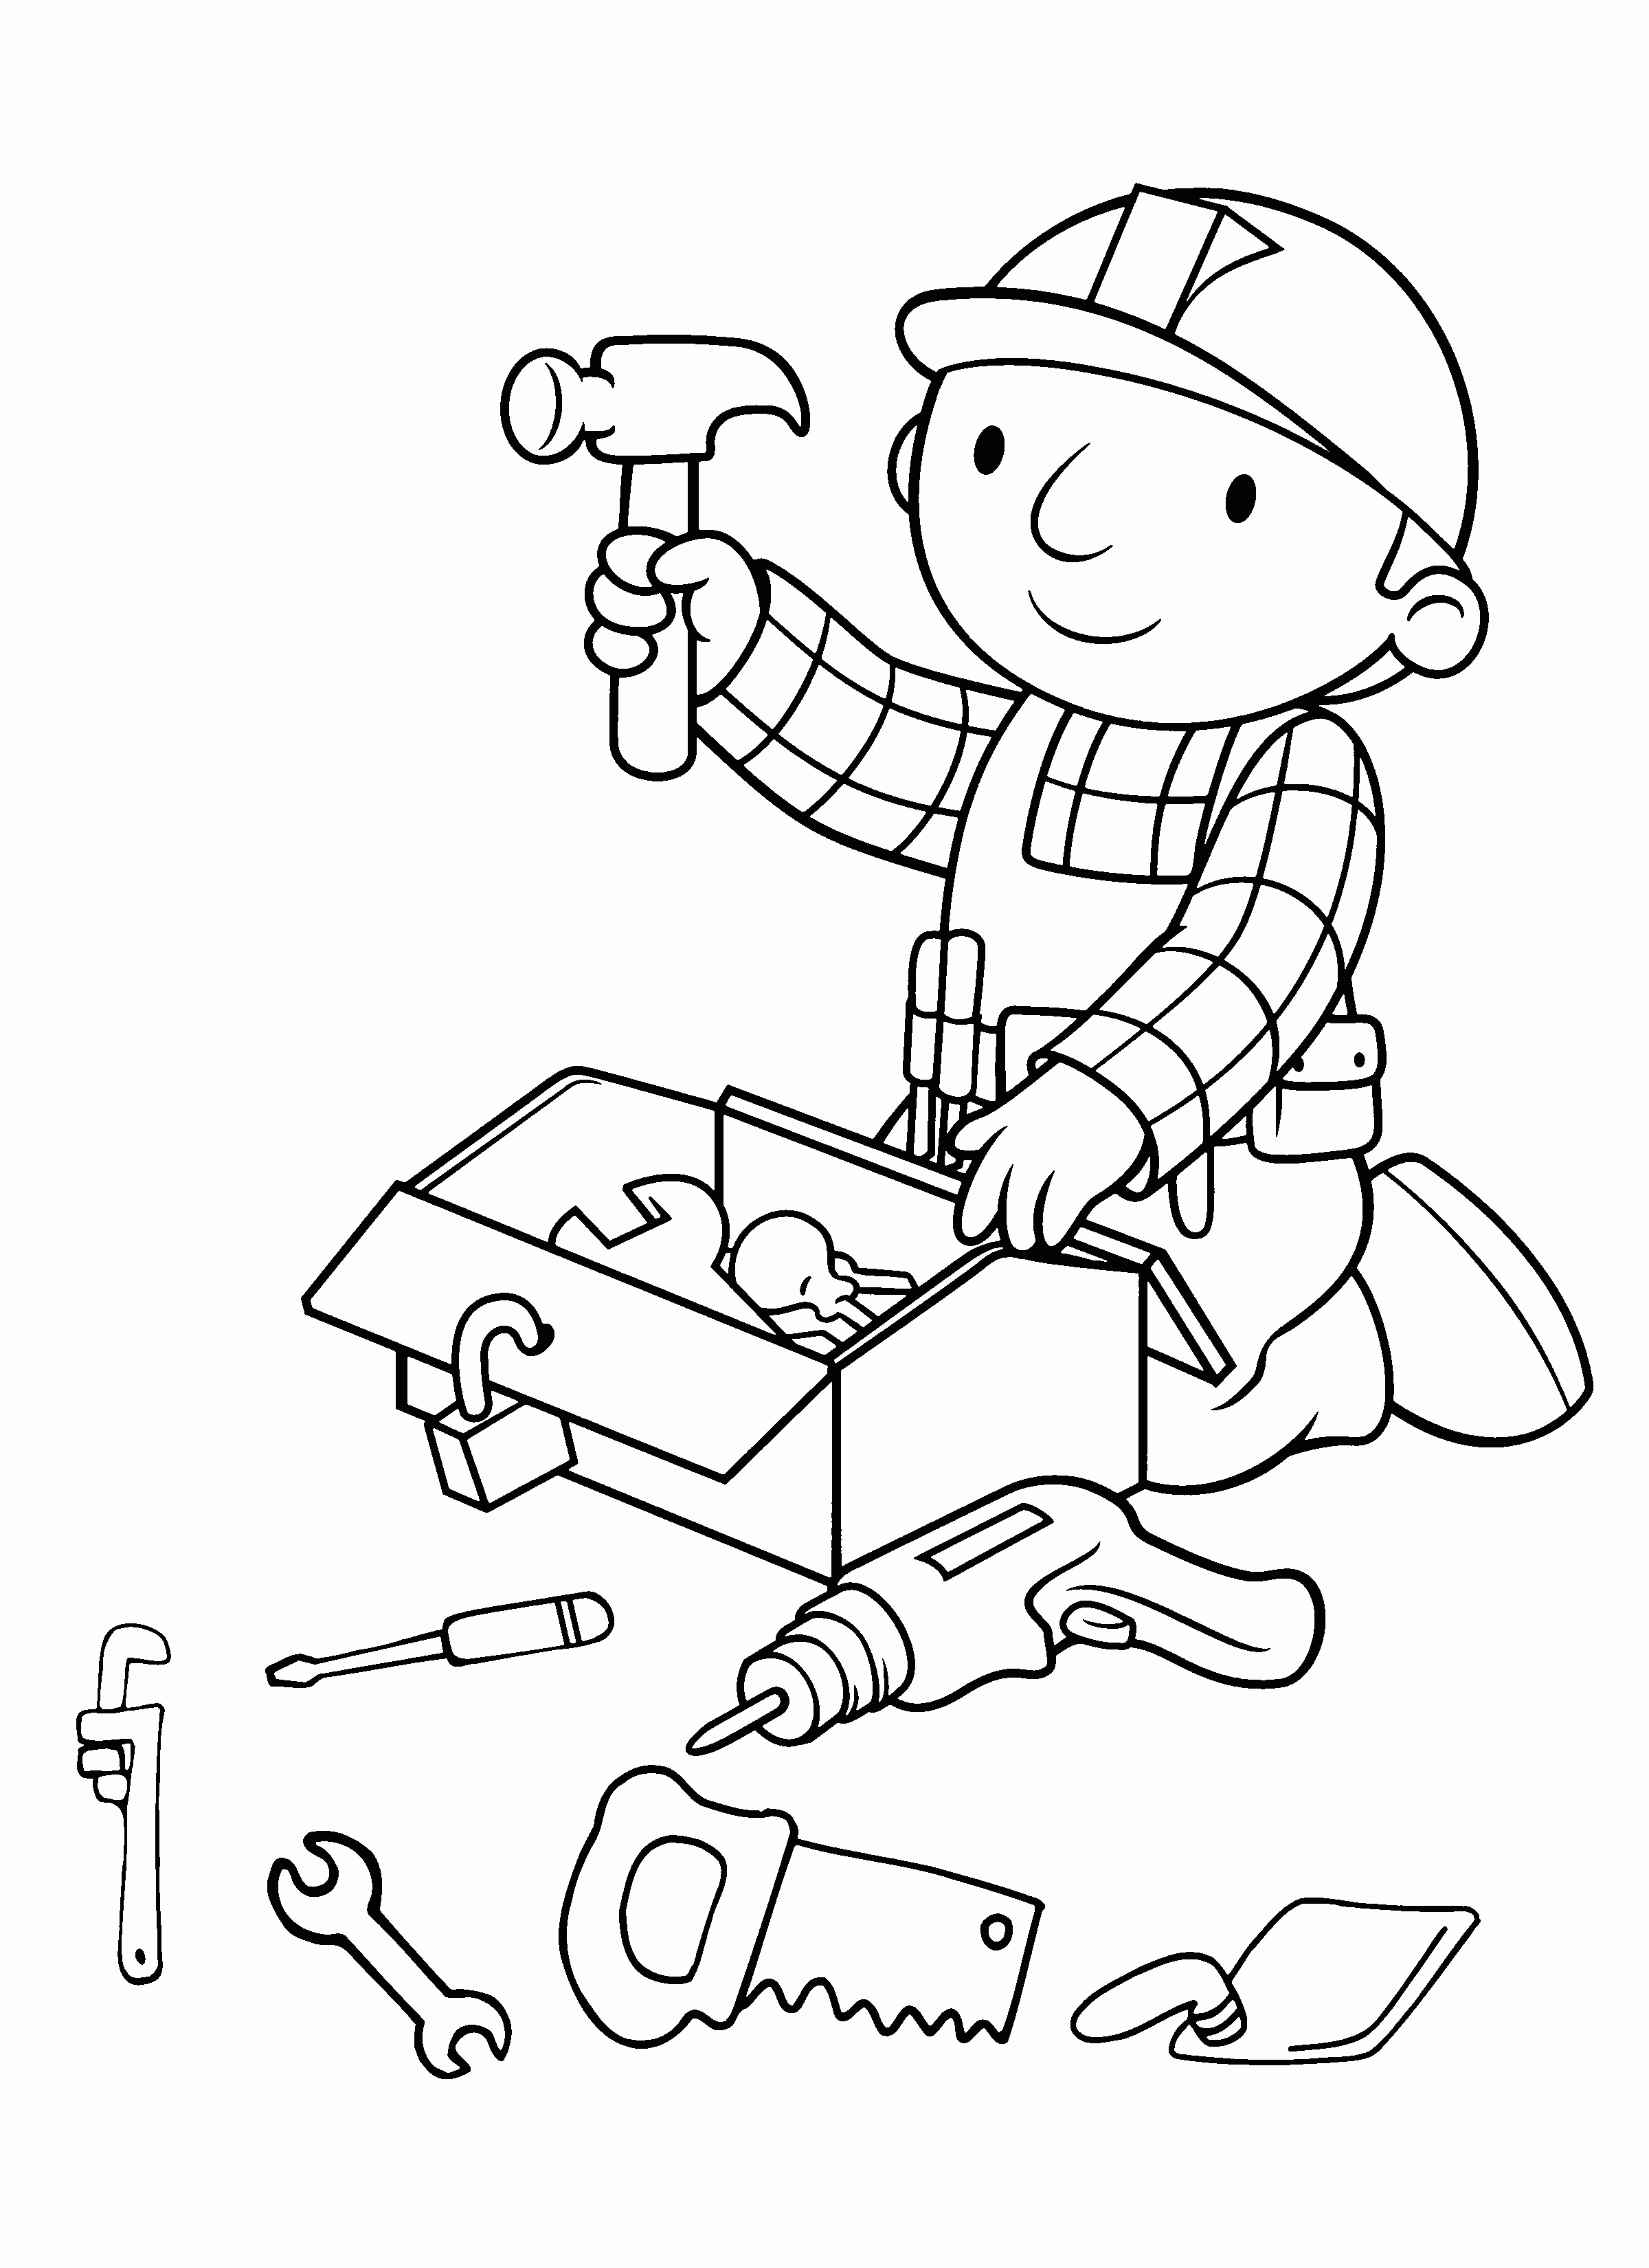 Printable Bob the Builder Coloring Pages | Coloring Me